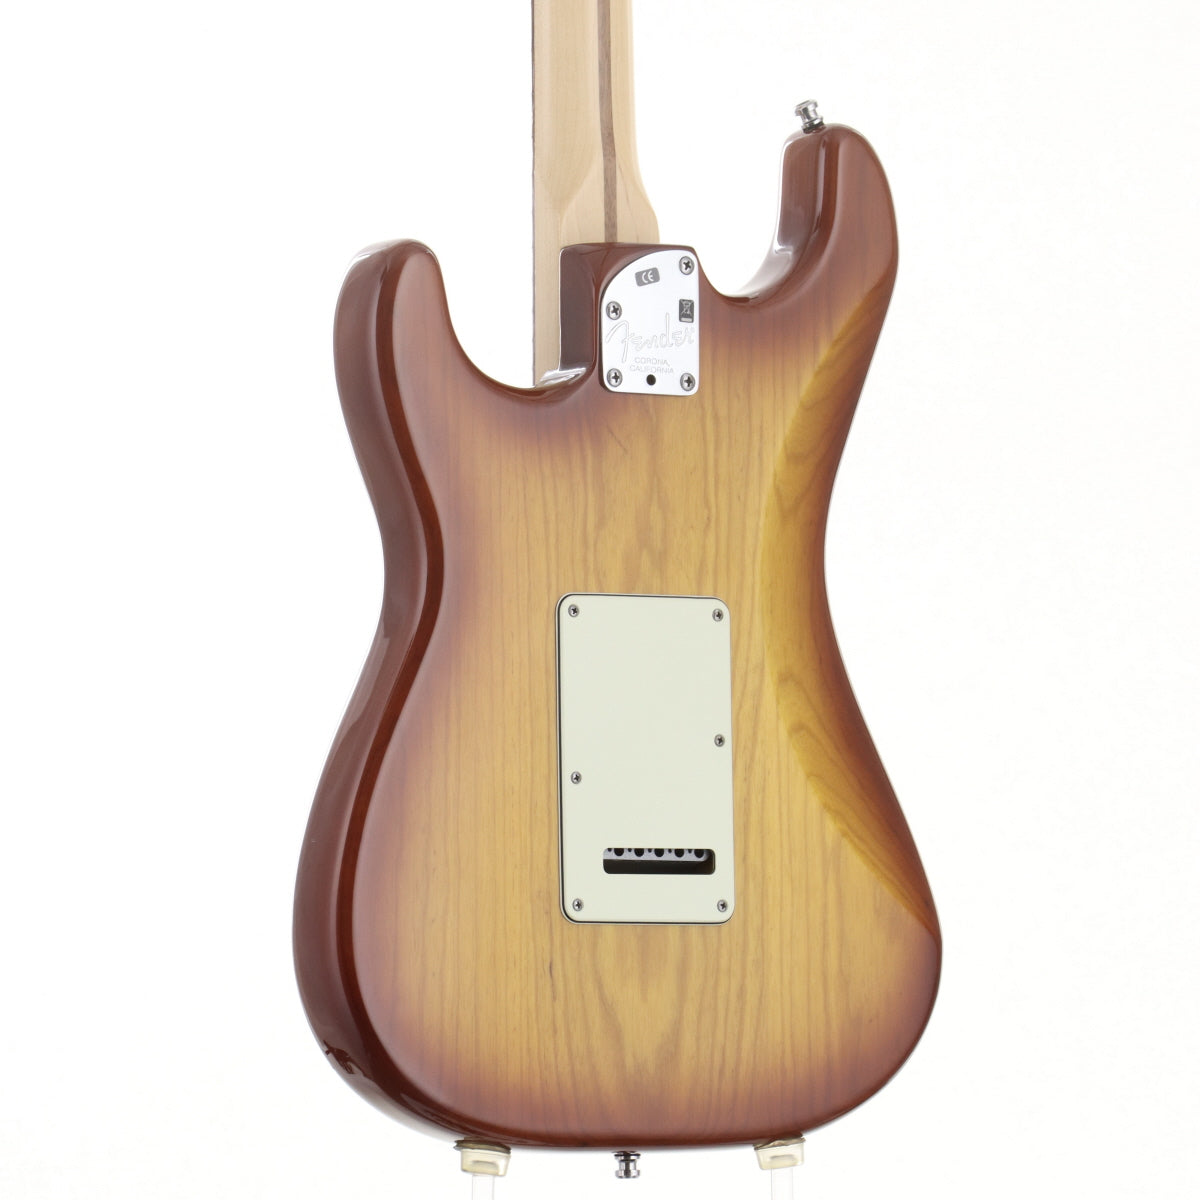 [SN DZ9347775] USED Fender / American Deluxe Stratocaster N3 Ash Aged Cherry Burst Rosewood Fingerbord 2009 [09]